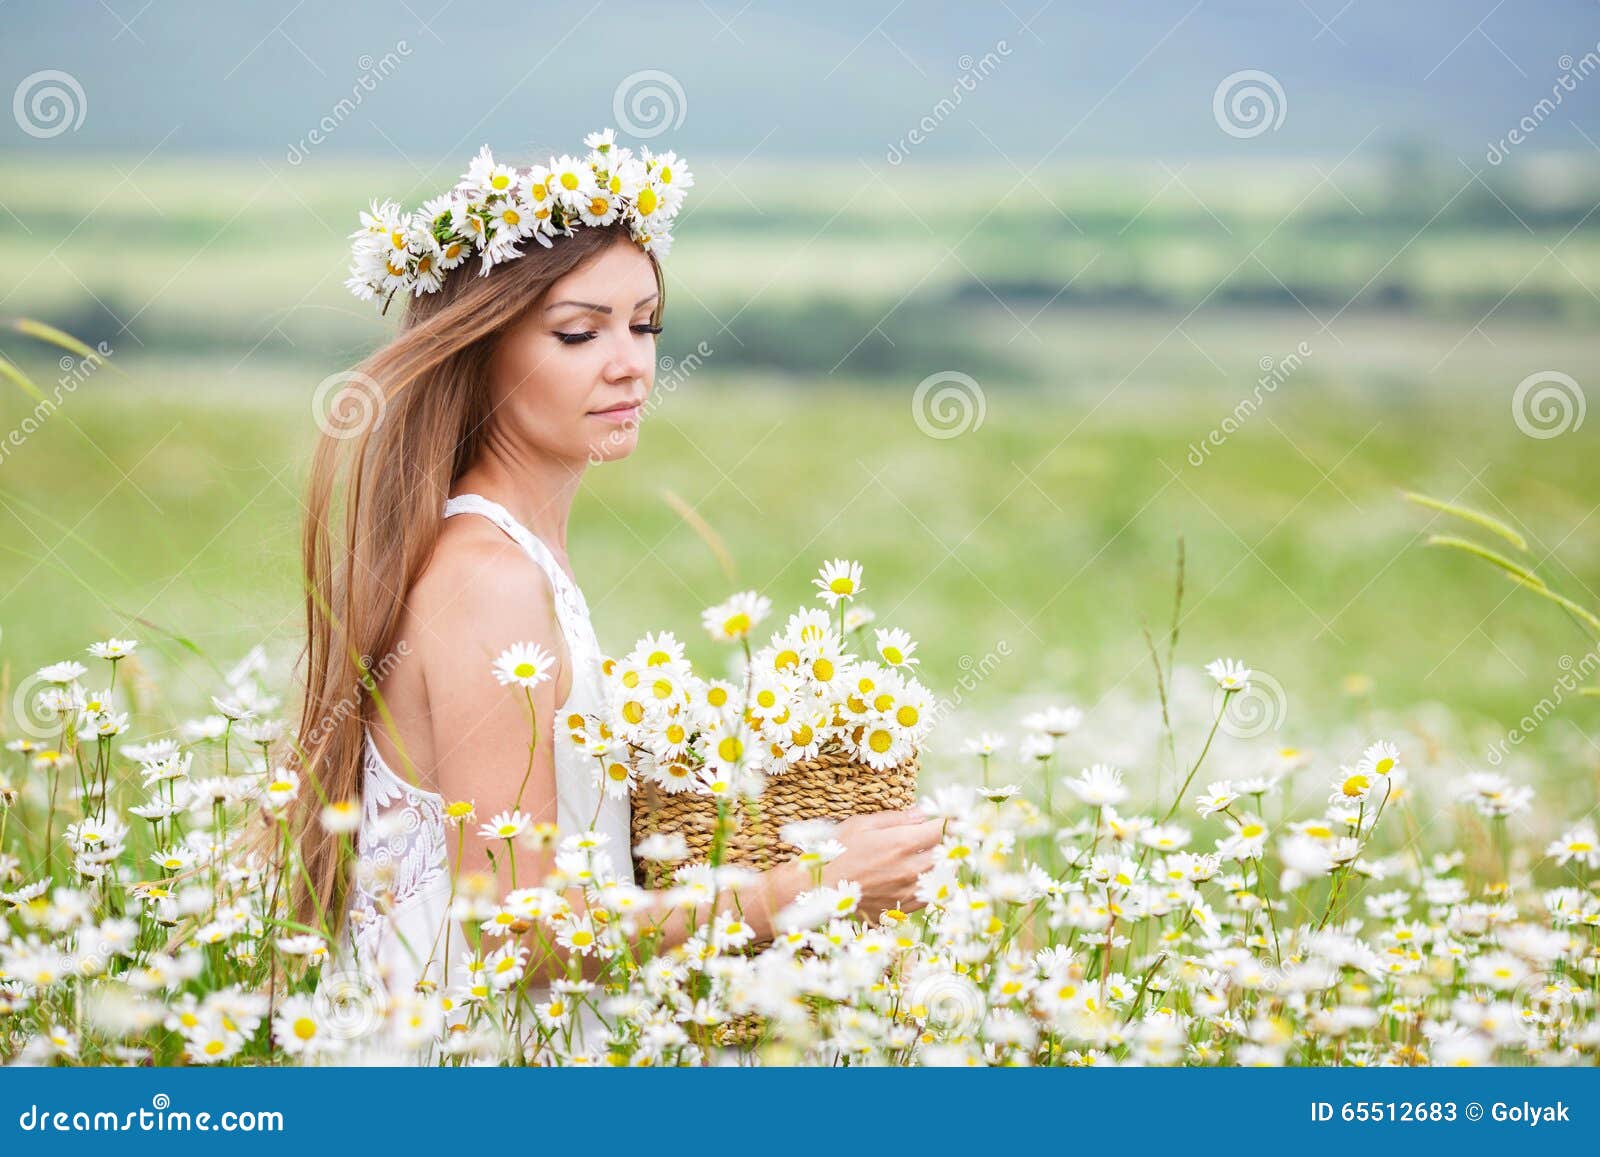 Young Woman in a Field of Blooming Daisies Stock Image - Image of ...